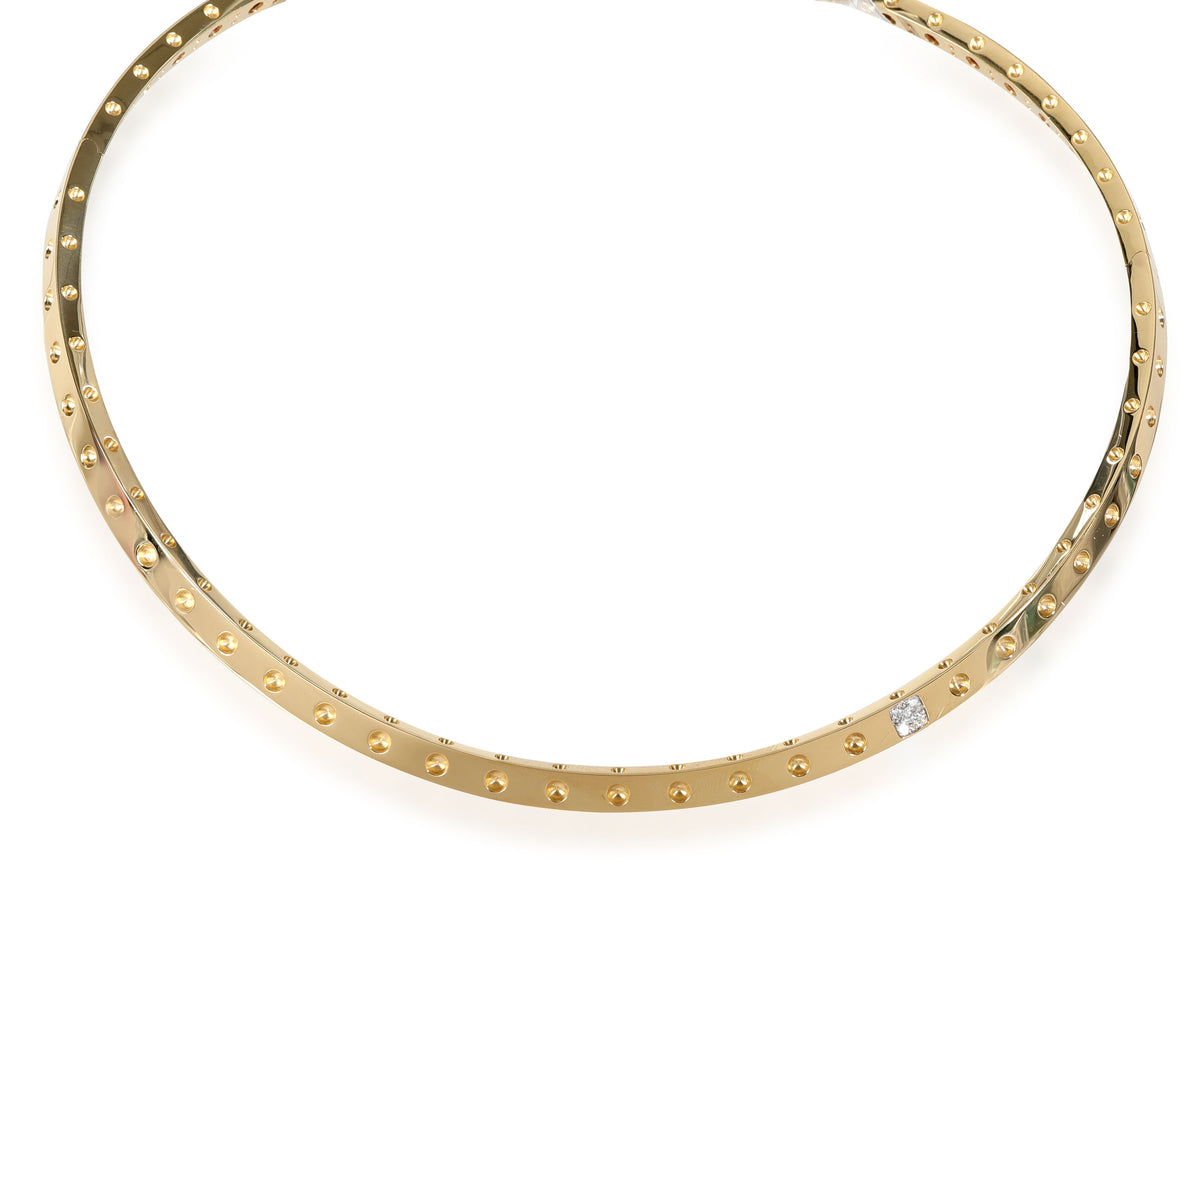 Pois Moi Hinged Diamond Choker Necklace in 18k Yellow Gold 0.08 Ctw